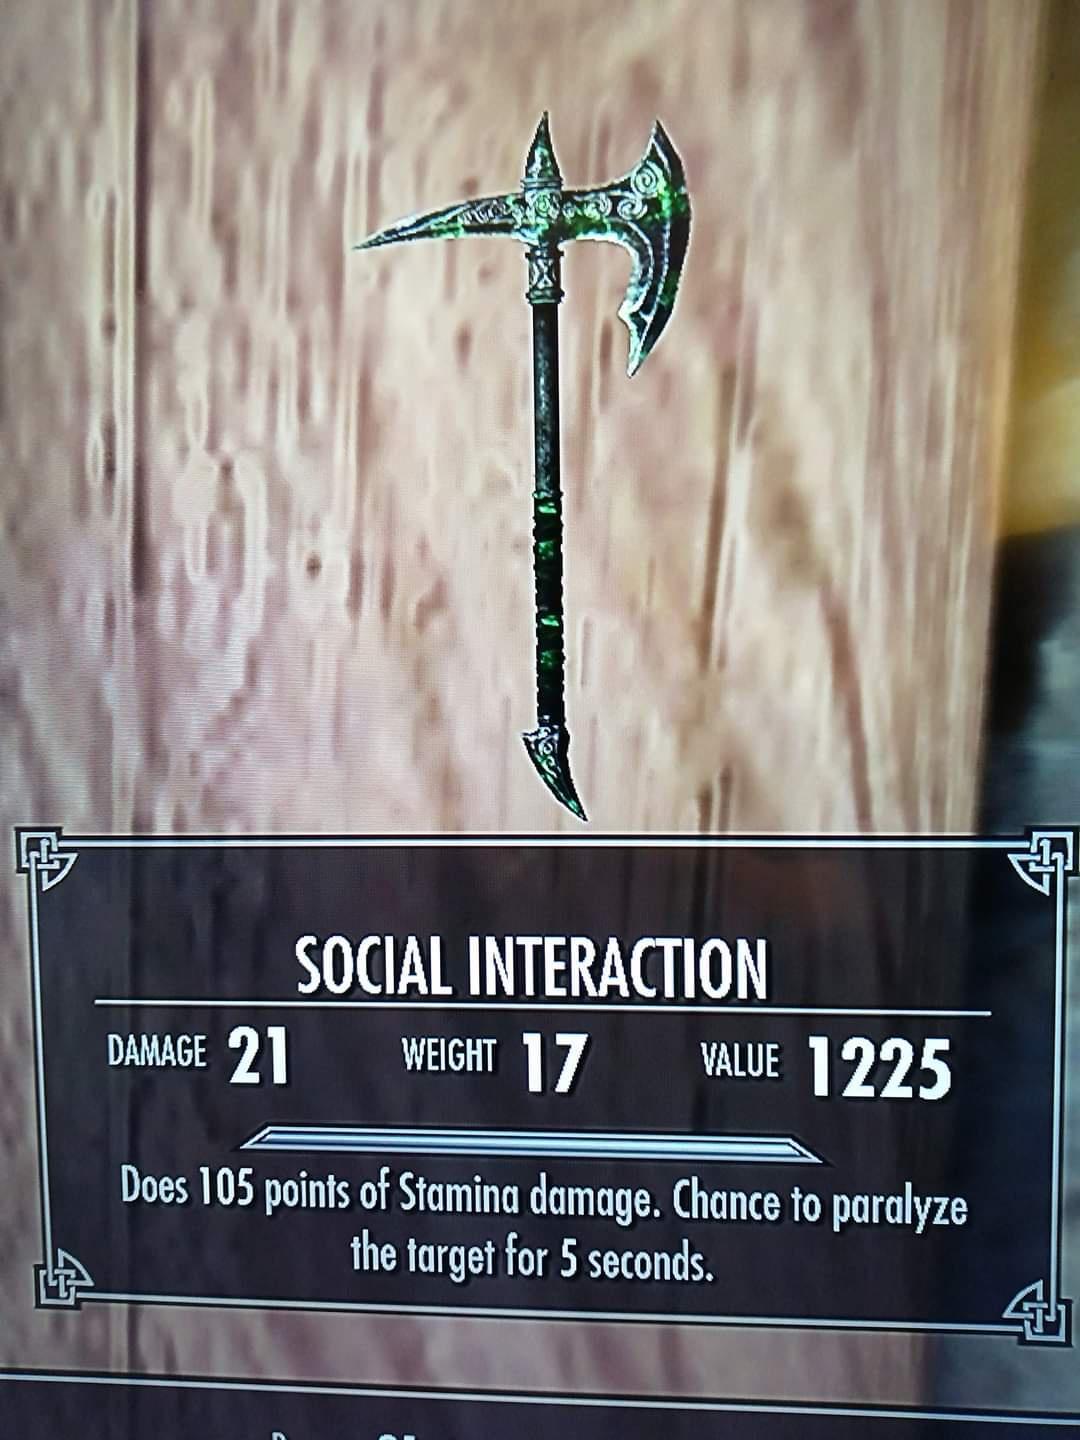 gaming memes - skyrim damage meme - Social Interaction Weight 17 Value 1225 Damage 21 Does 105 points of Stamina damage. Chance to paralyze the target for 5 seconds.